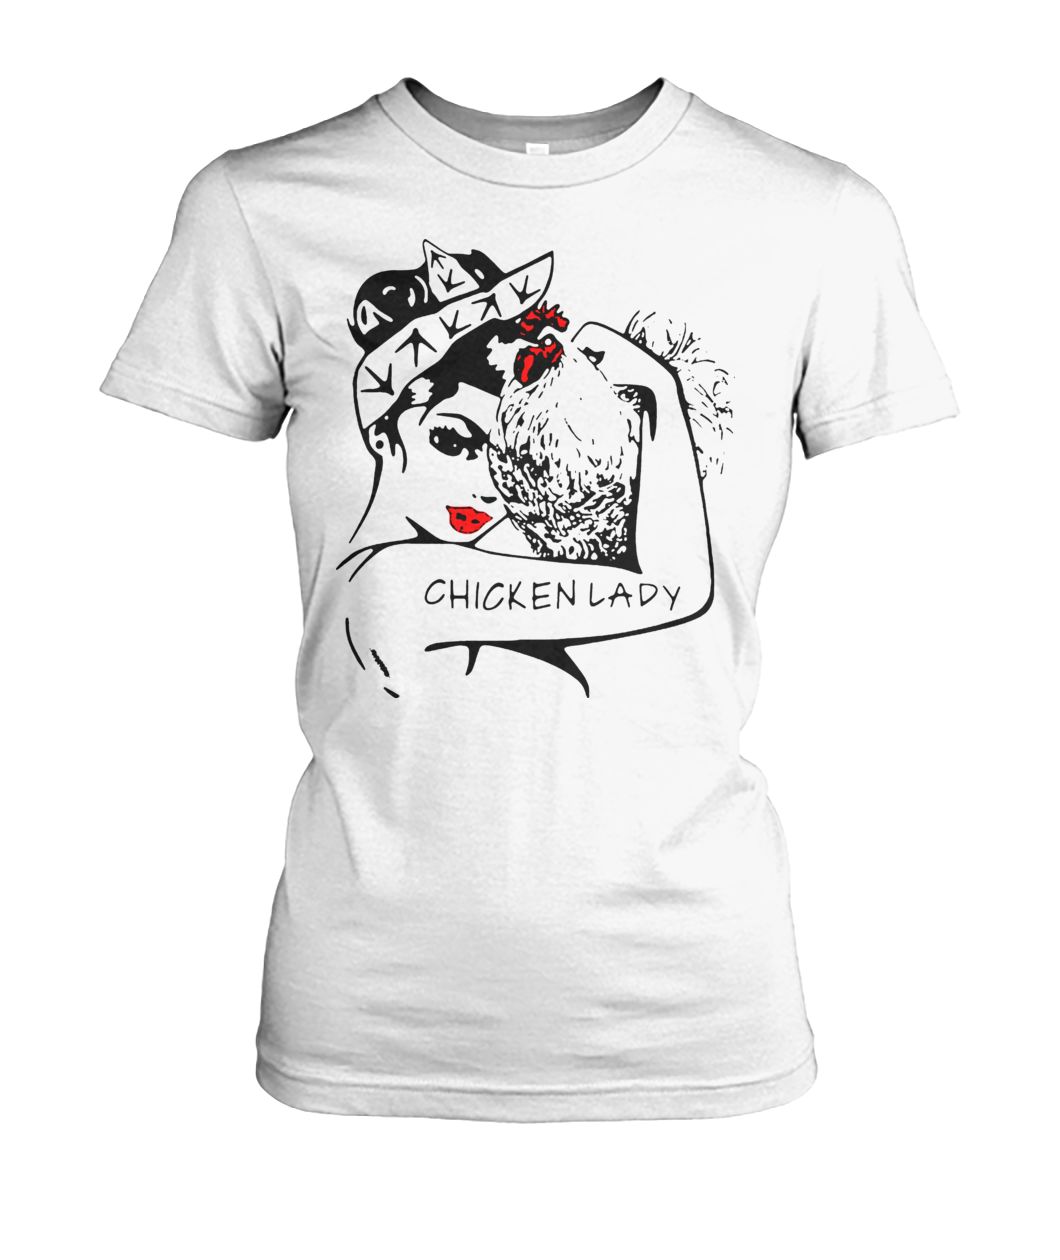 Chicken and unbreakable strong woman chicken lady women's crew tee